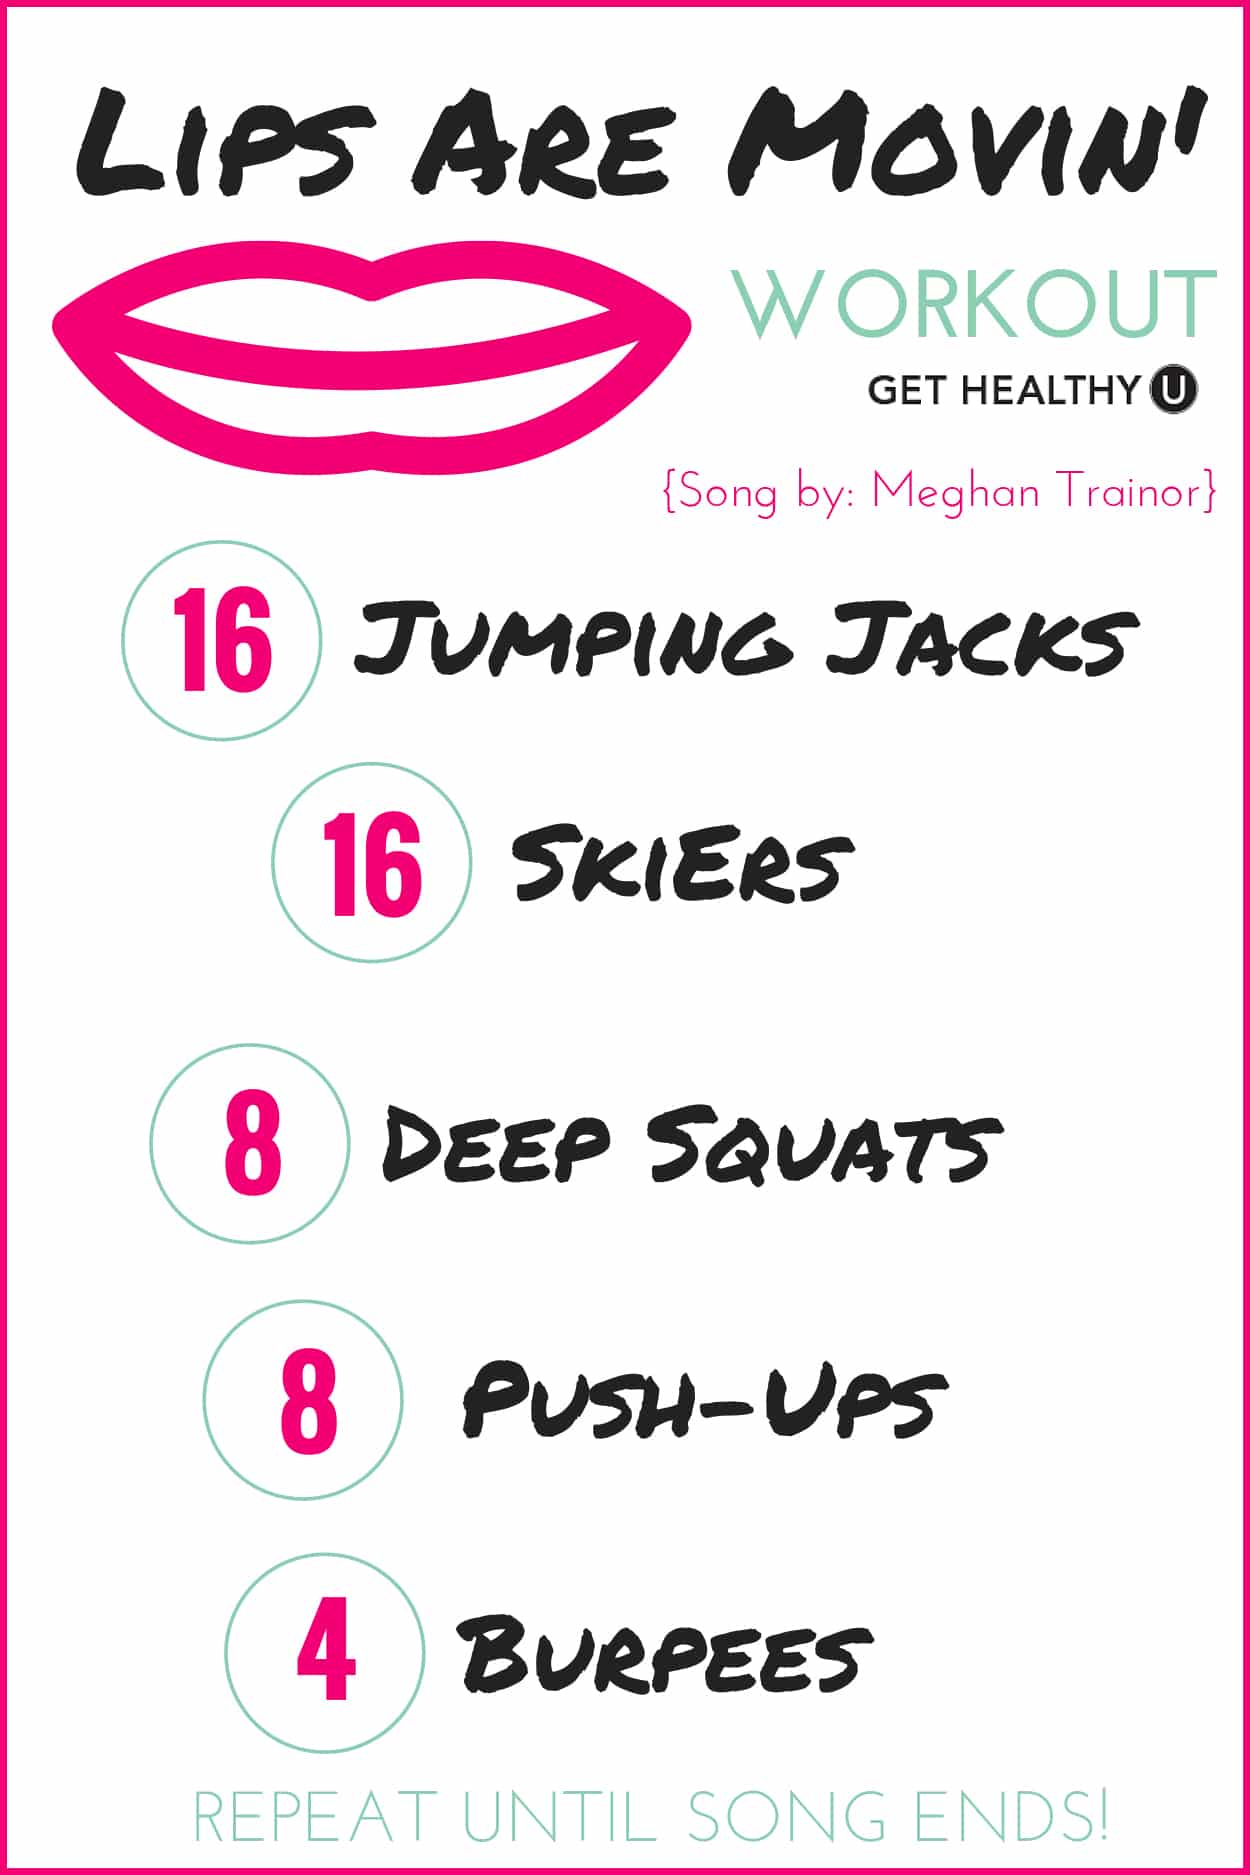 Turn up the tunes and get sweating! This is a no-equipment one song workout done to Meghan Trainor's "Lips Are Movin'"